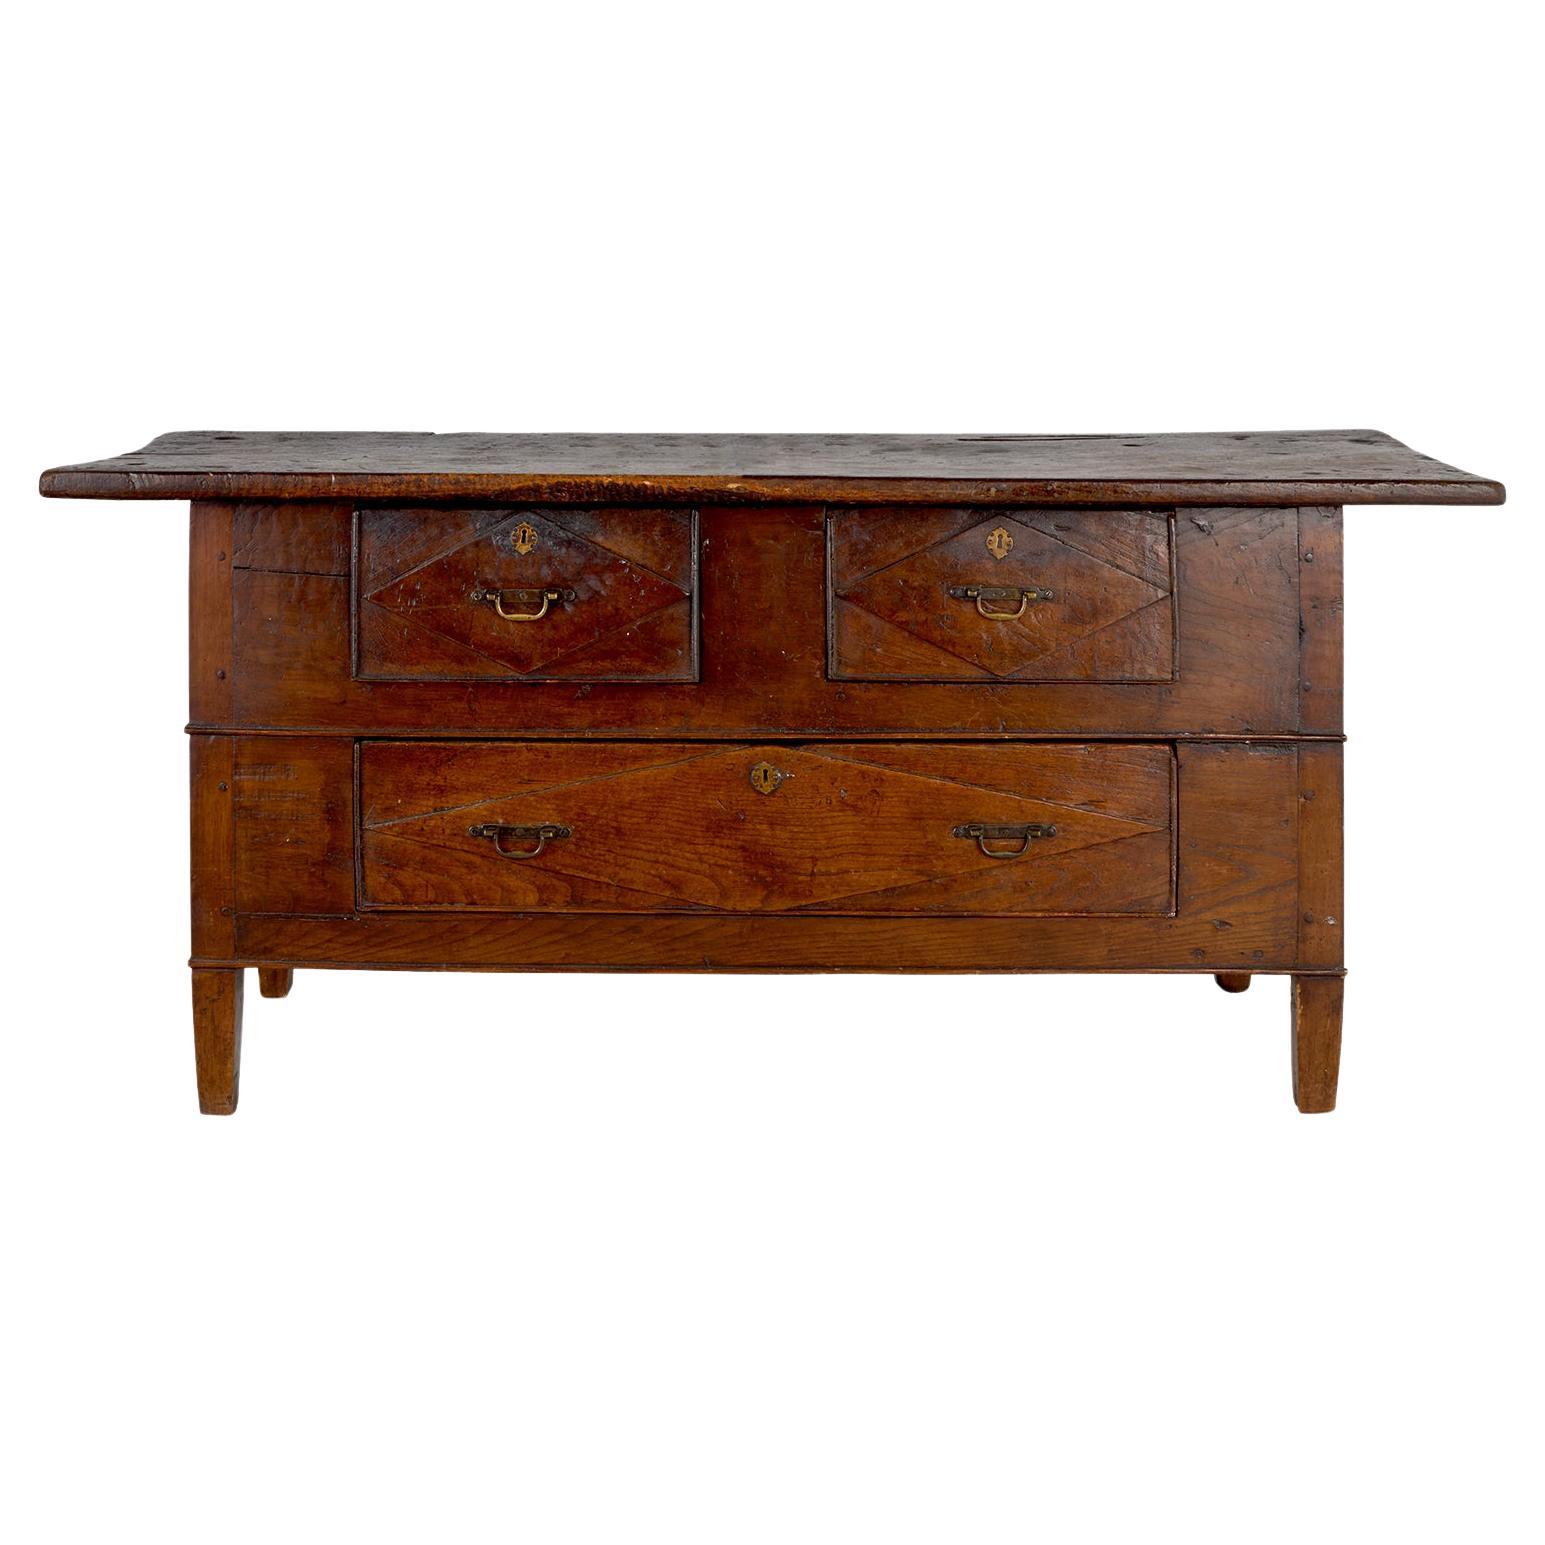 Spanish Serving Table In Patinaed Walnut For Sale